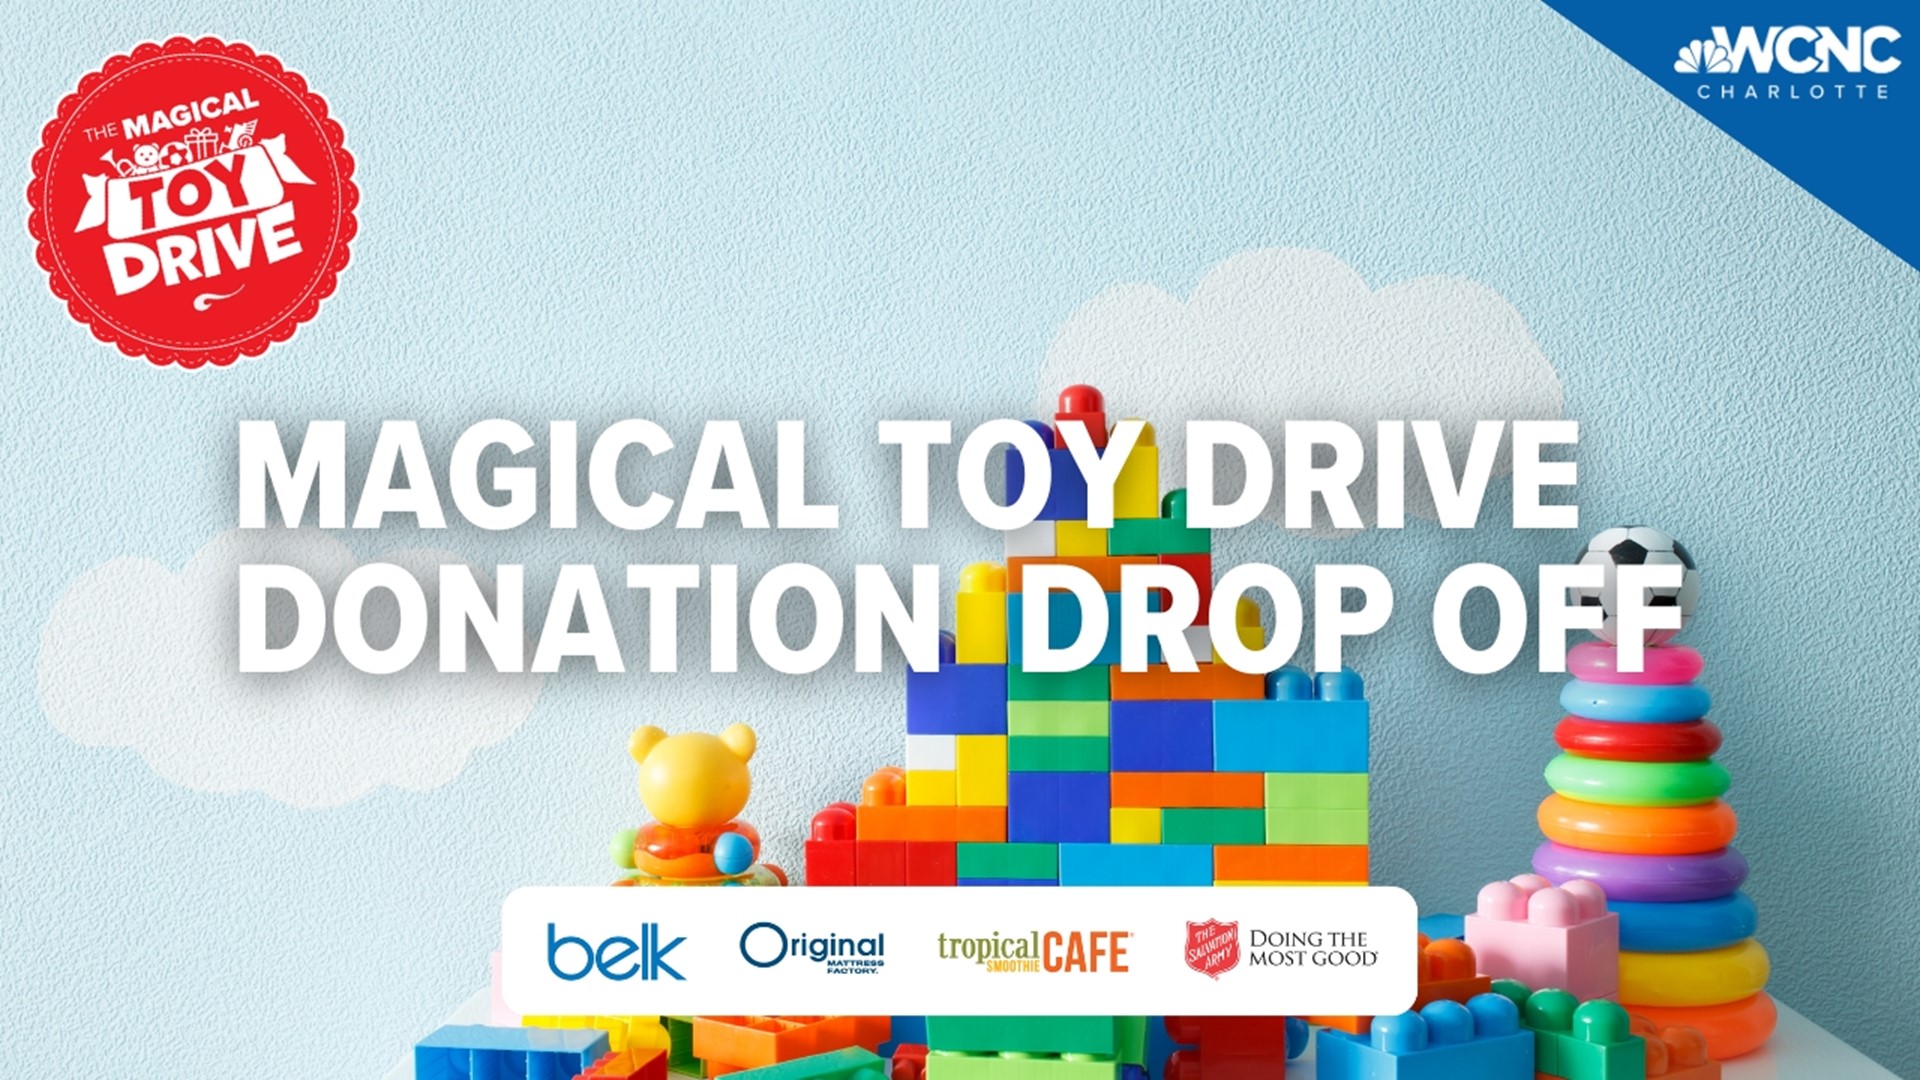 Donate a new, unwrapped toy to the Salvation Army's Magical Toy Drive at Belk Carolina Place on Saturday, Dec. 10, 2022 from 9am to 4pm.